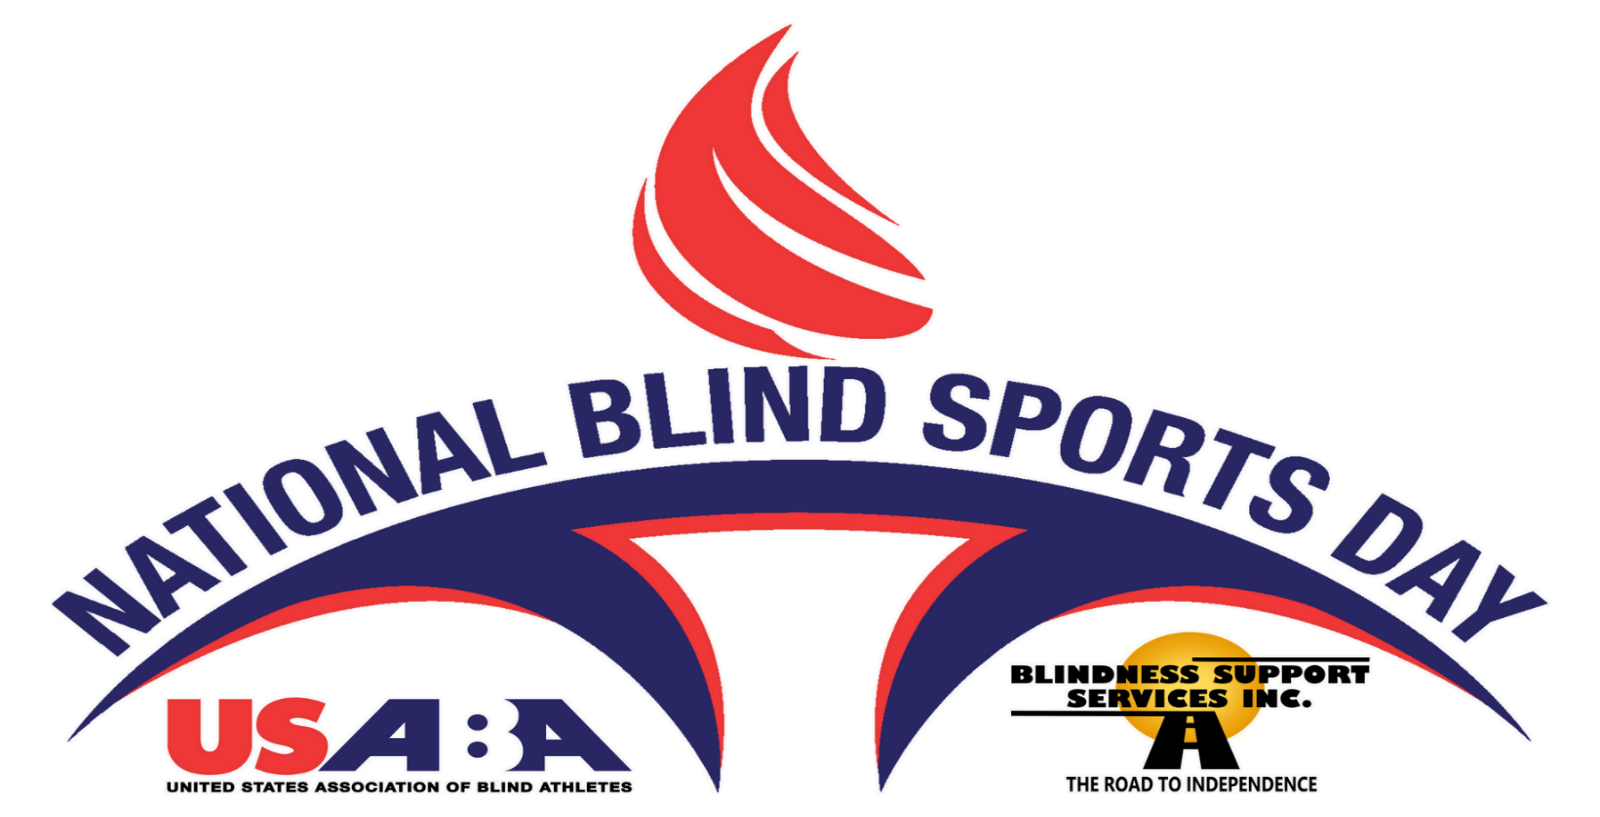 National Blind Sports Day logo, A flame above the words National Blind Sports Day, with the United States Association of Blind Athletes logo, the acronym USABA, and the Blindness Support Services logo, A sun over a road with the words The road to independence below, in the bottom left and right corners respectively.